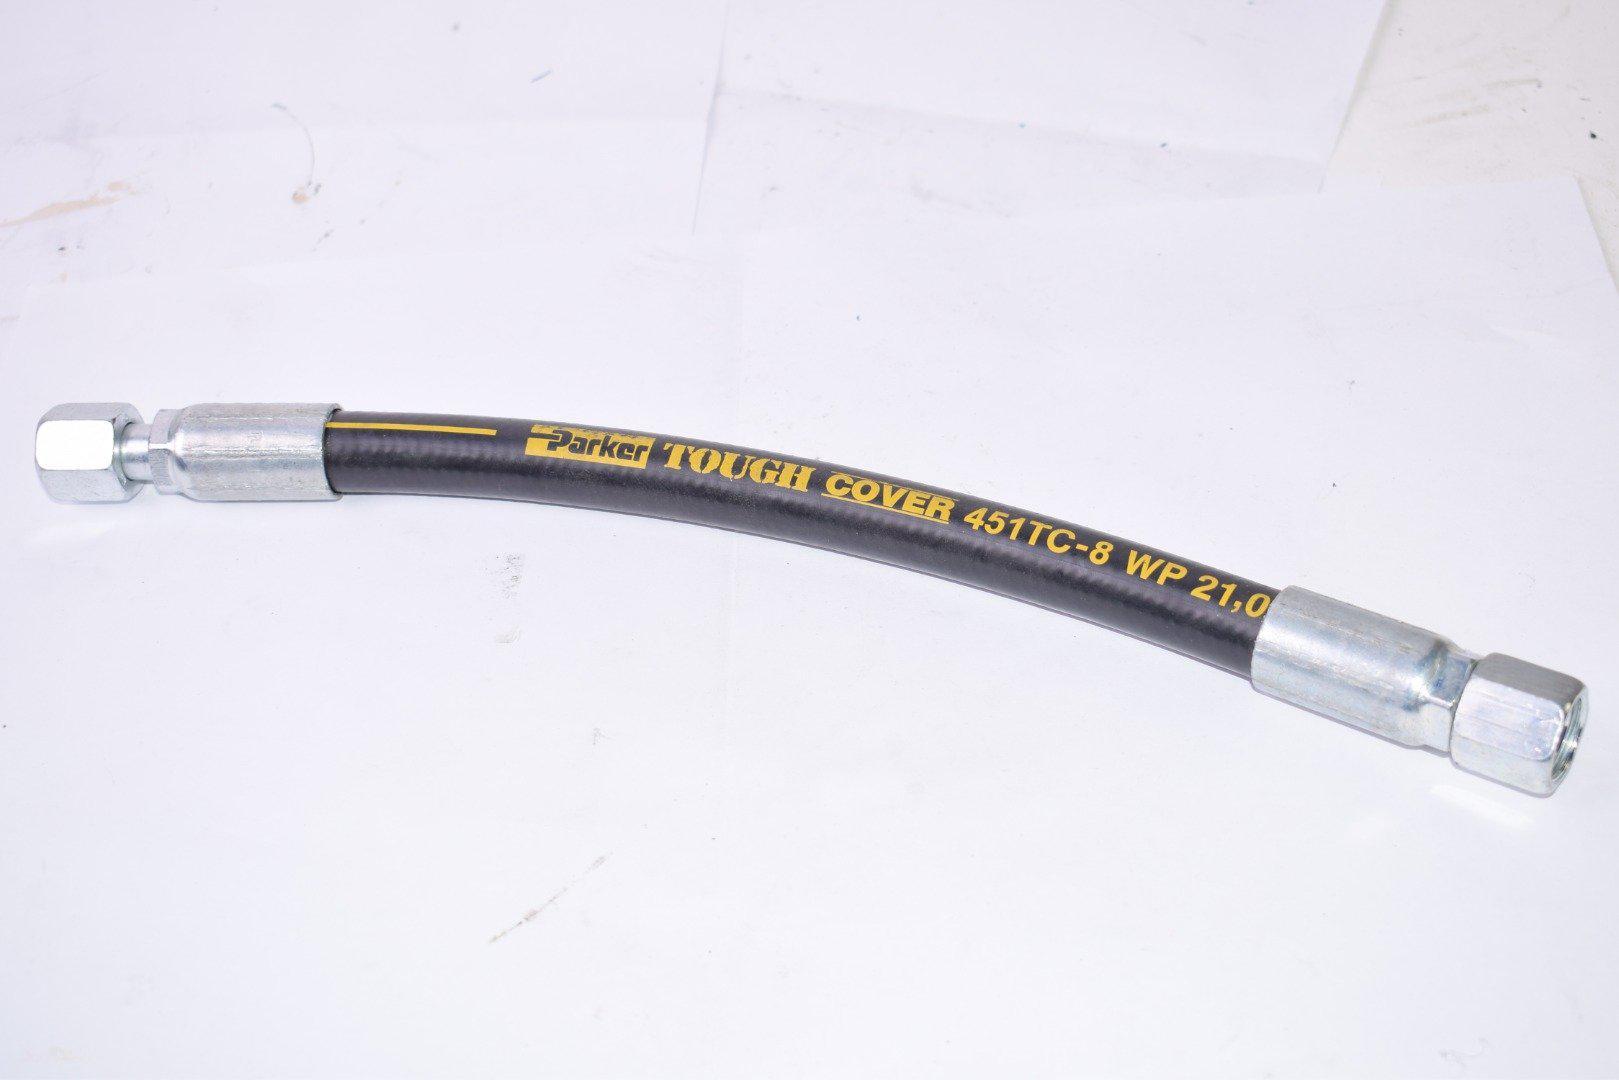 Shop for Hoses at VB Industrial Supply: Aeroquip, Allied Systems